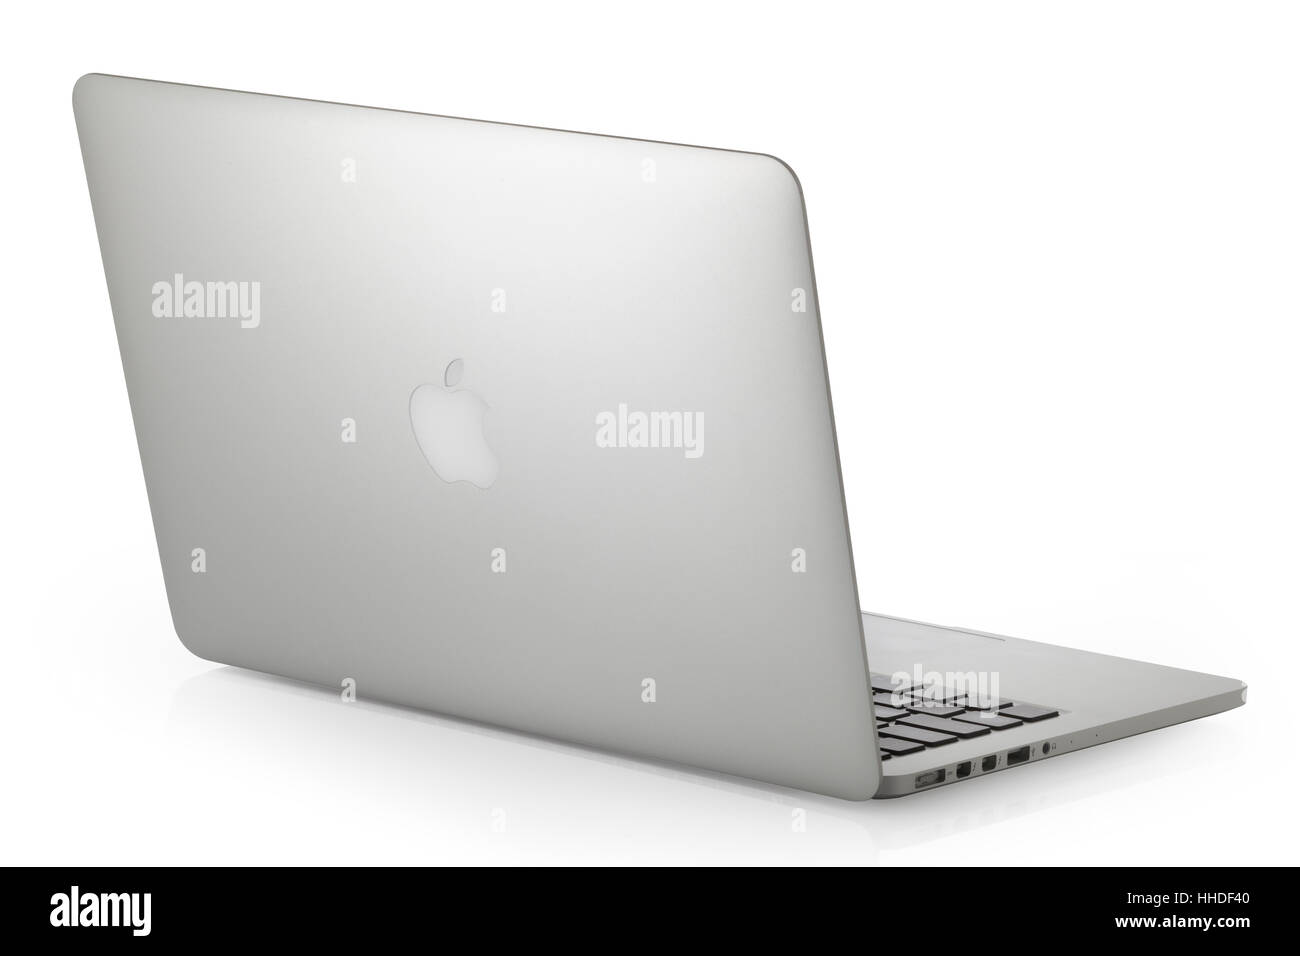 Apple MacBook Pro laptop computer by Apple Inc. on a white background. Stock Photo